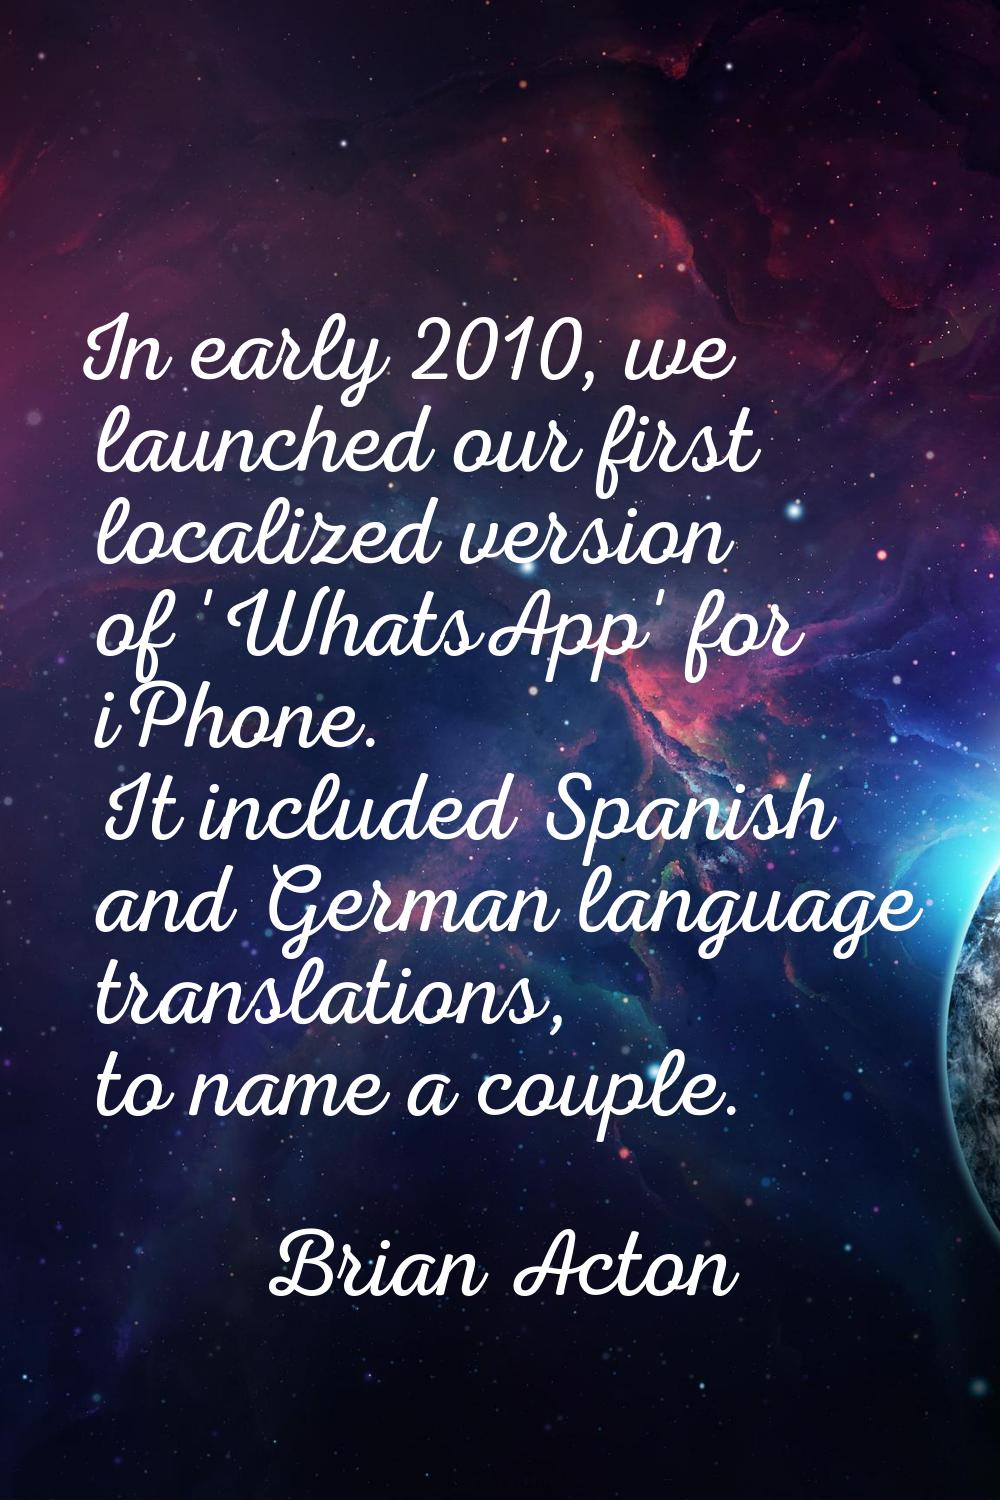 In early 2010, we launched our first localized version of 'WhatsApp' for iPhone. It included Spanis